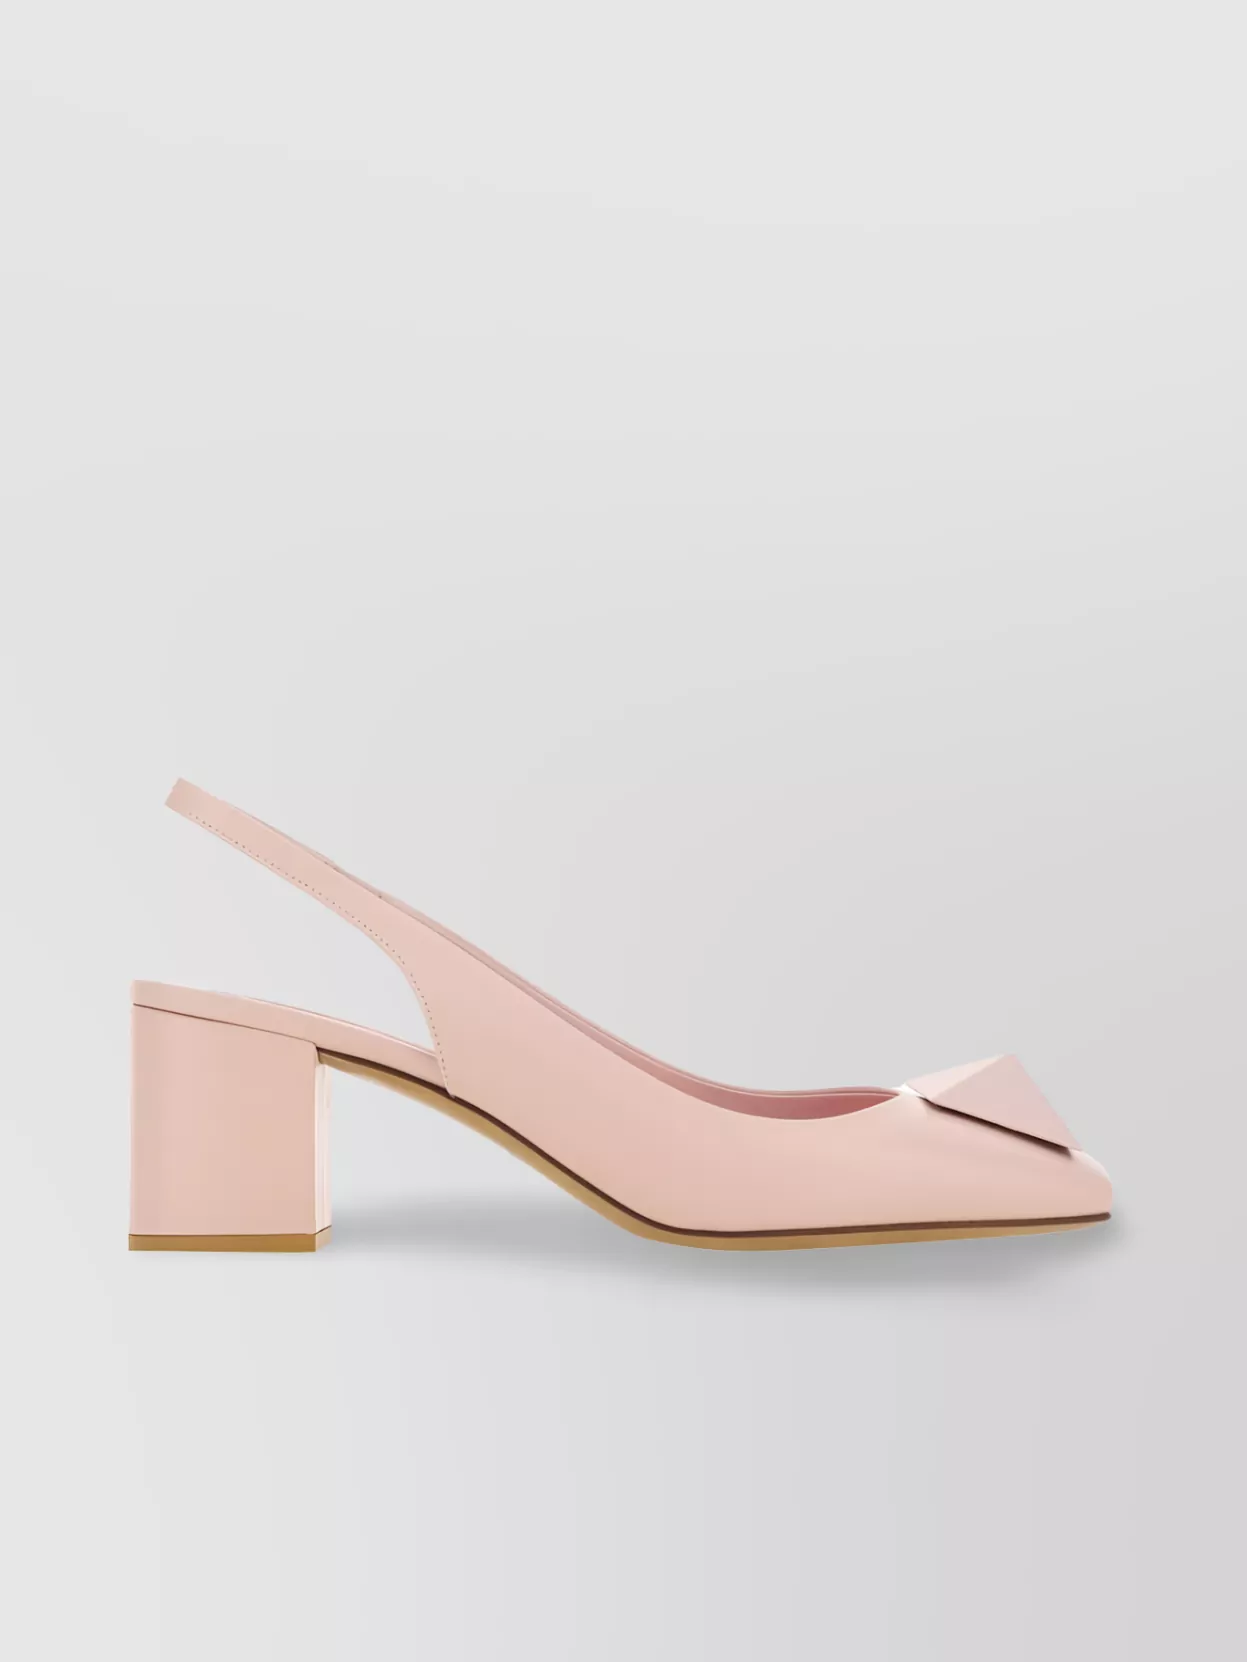 Shop Valentino Heeled Sandals With Pointed Toe And Bow Accent In Pastel